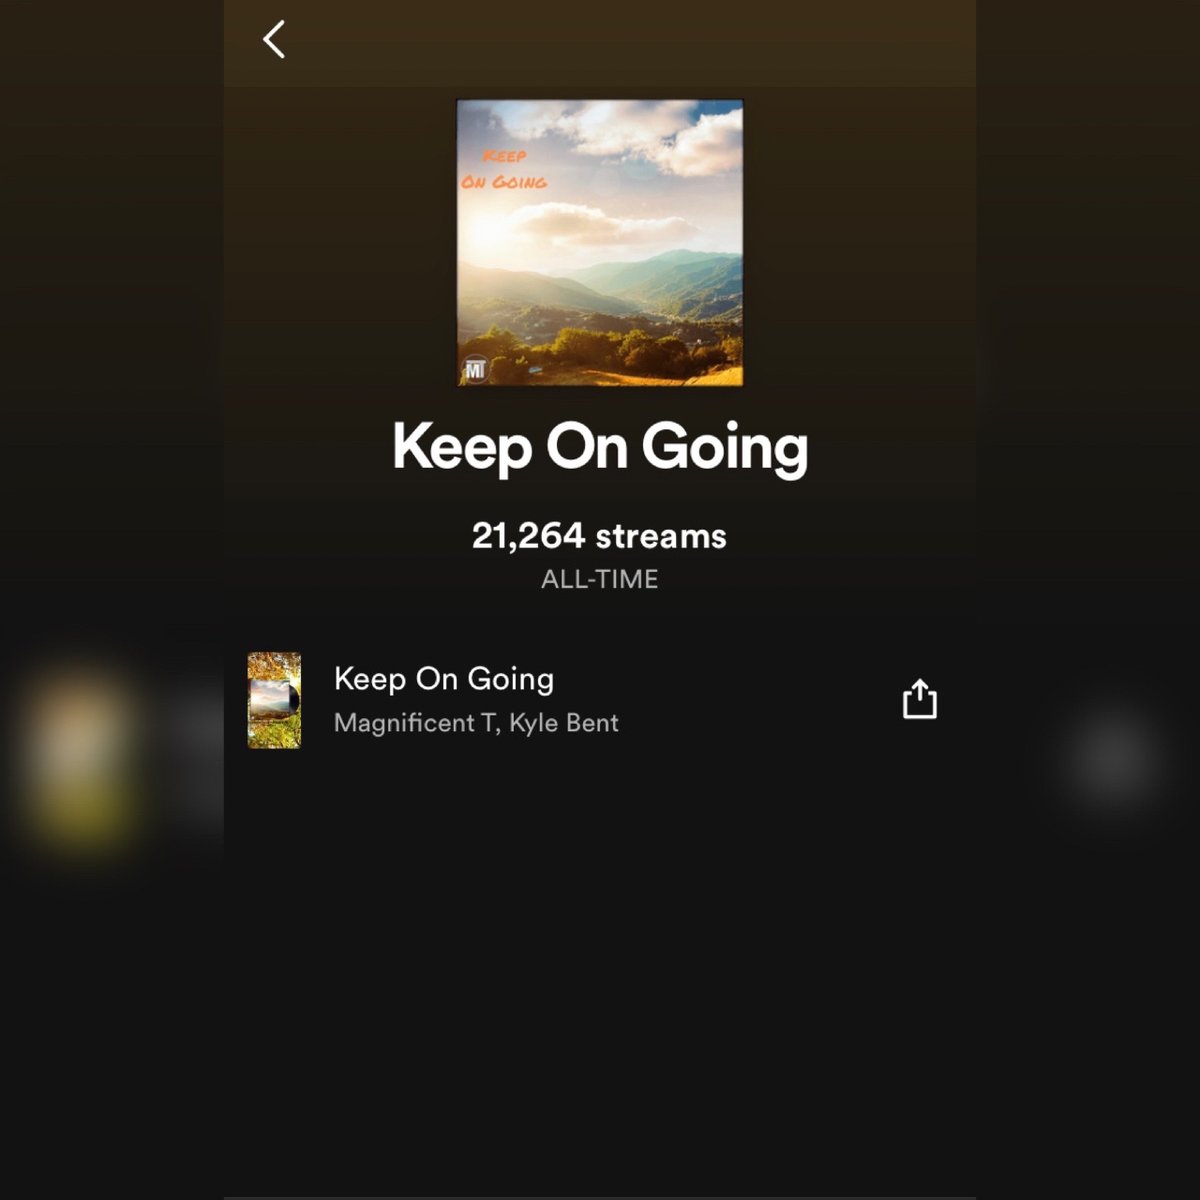 Big First Month For My New Single On Spotify 🤯‼️ Shout Out To Everyone Listening 🙏🏼 If You Haven’t Yet The Link Is Below For You 👇🏼👇🏼👇🏼
-
hyperfollow.com/MagnificentT 
-
#MTGang🎙#Rap #HipHop #KeepOnGoing  #KyleBent
#NewSong2023 #Spotify